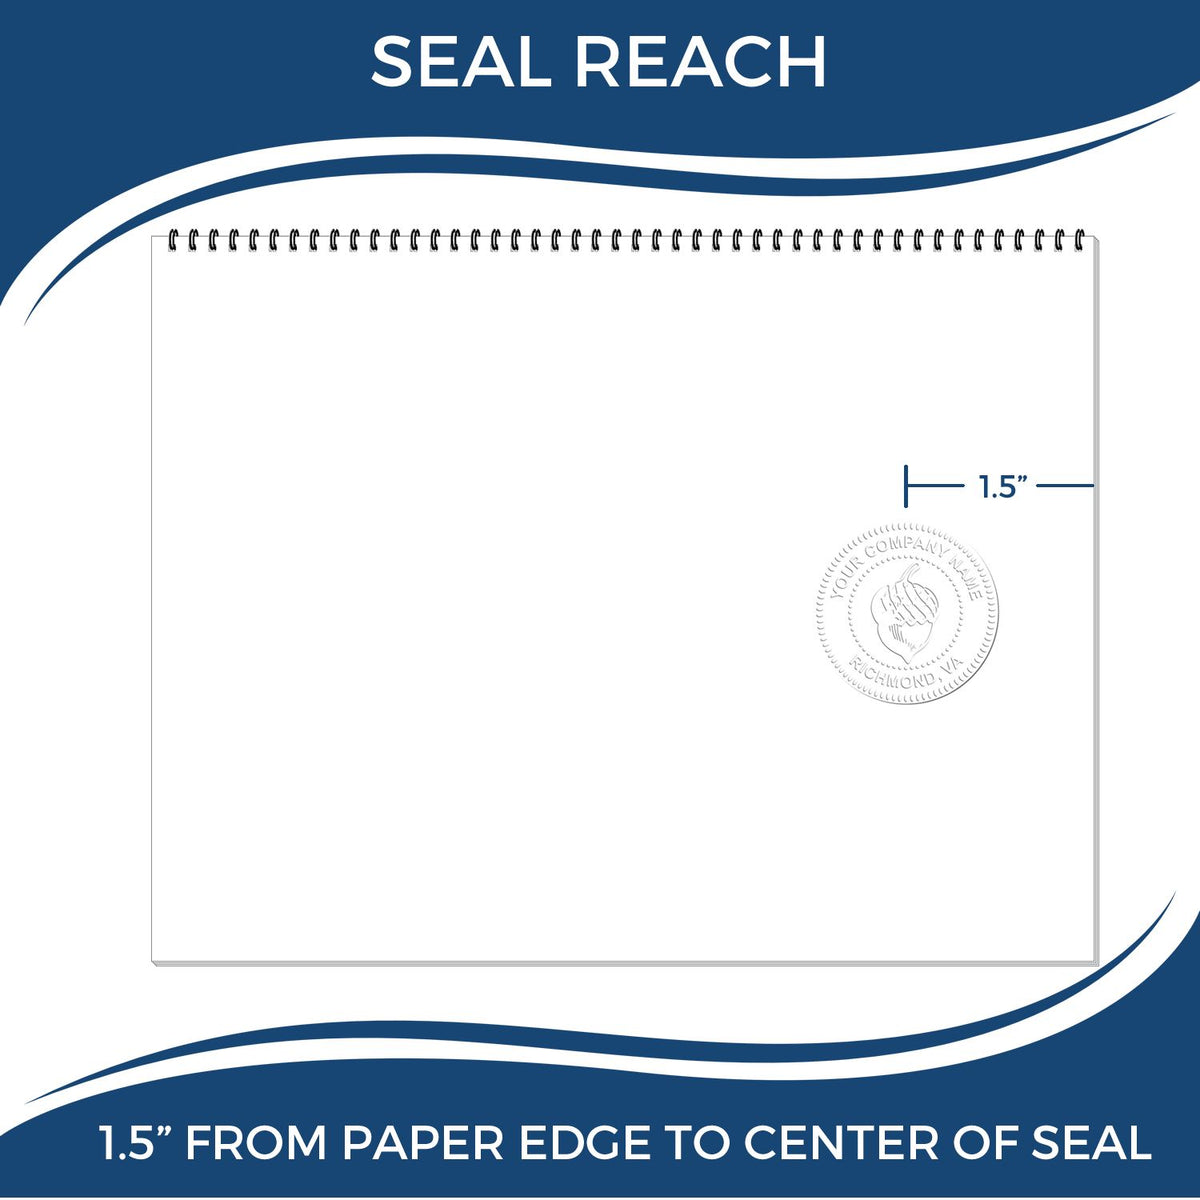 An infographic showing the seal reach which is represented by a ruler and a miniature seal image of the Soft Pocket Ohio Landscape Architect Embosser